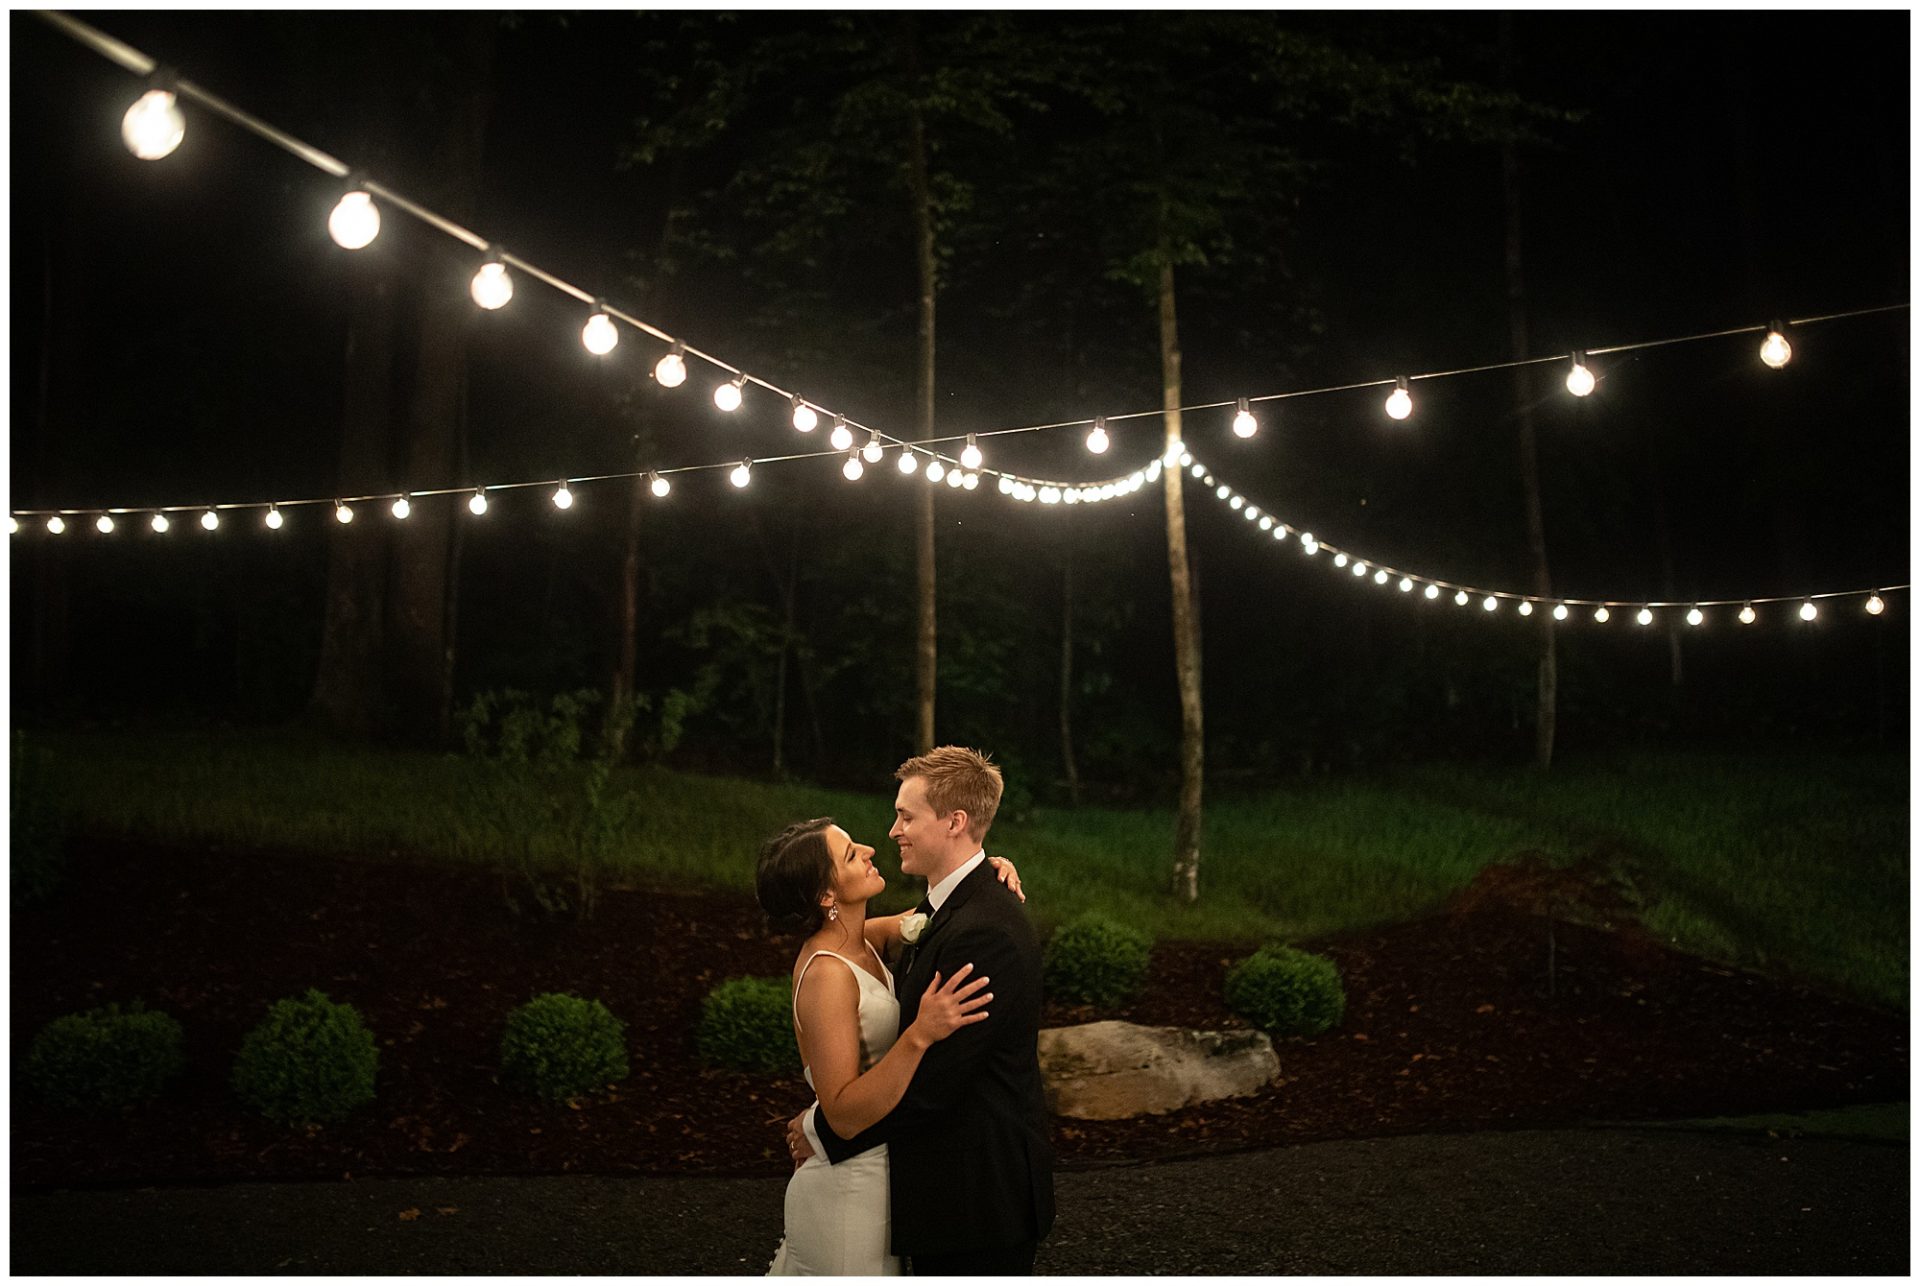 Chapel in the woods, firefly lane wedding, nashville wedding, open air chapel, outdoor reception under string lights, bride and groom under string lights